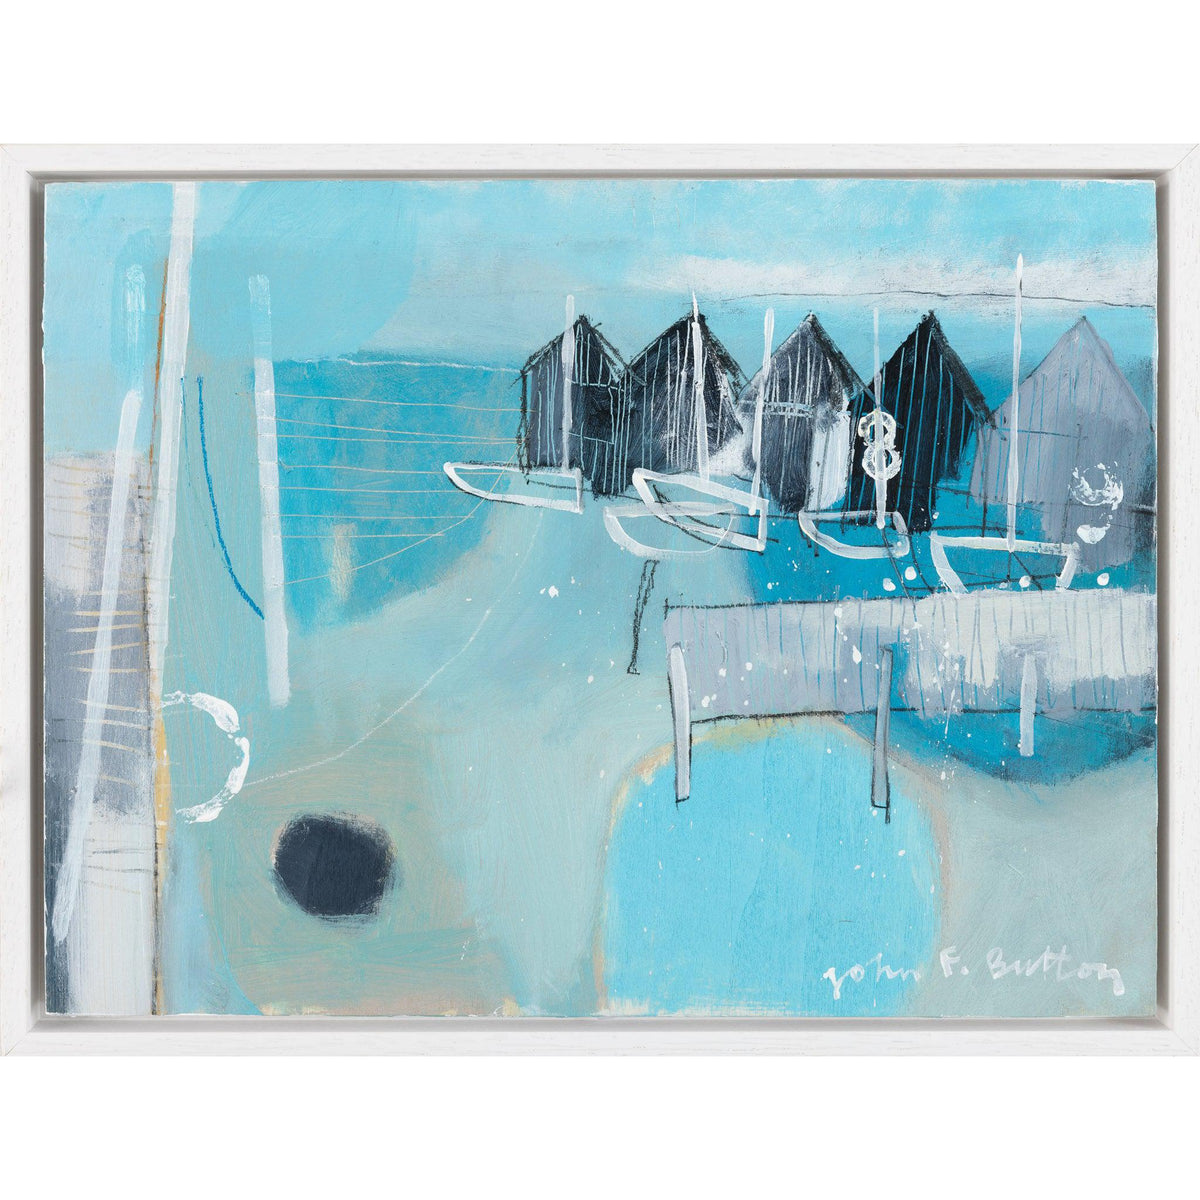 &#39;Feeling blue&#39; mixed media on board by John Button, available at Padstow Gallery, Cornwall